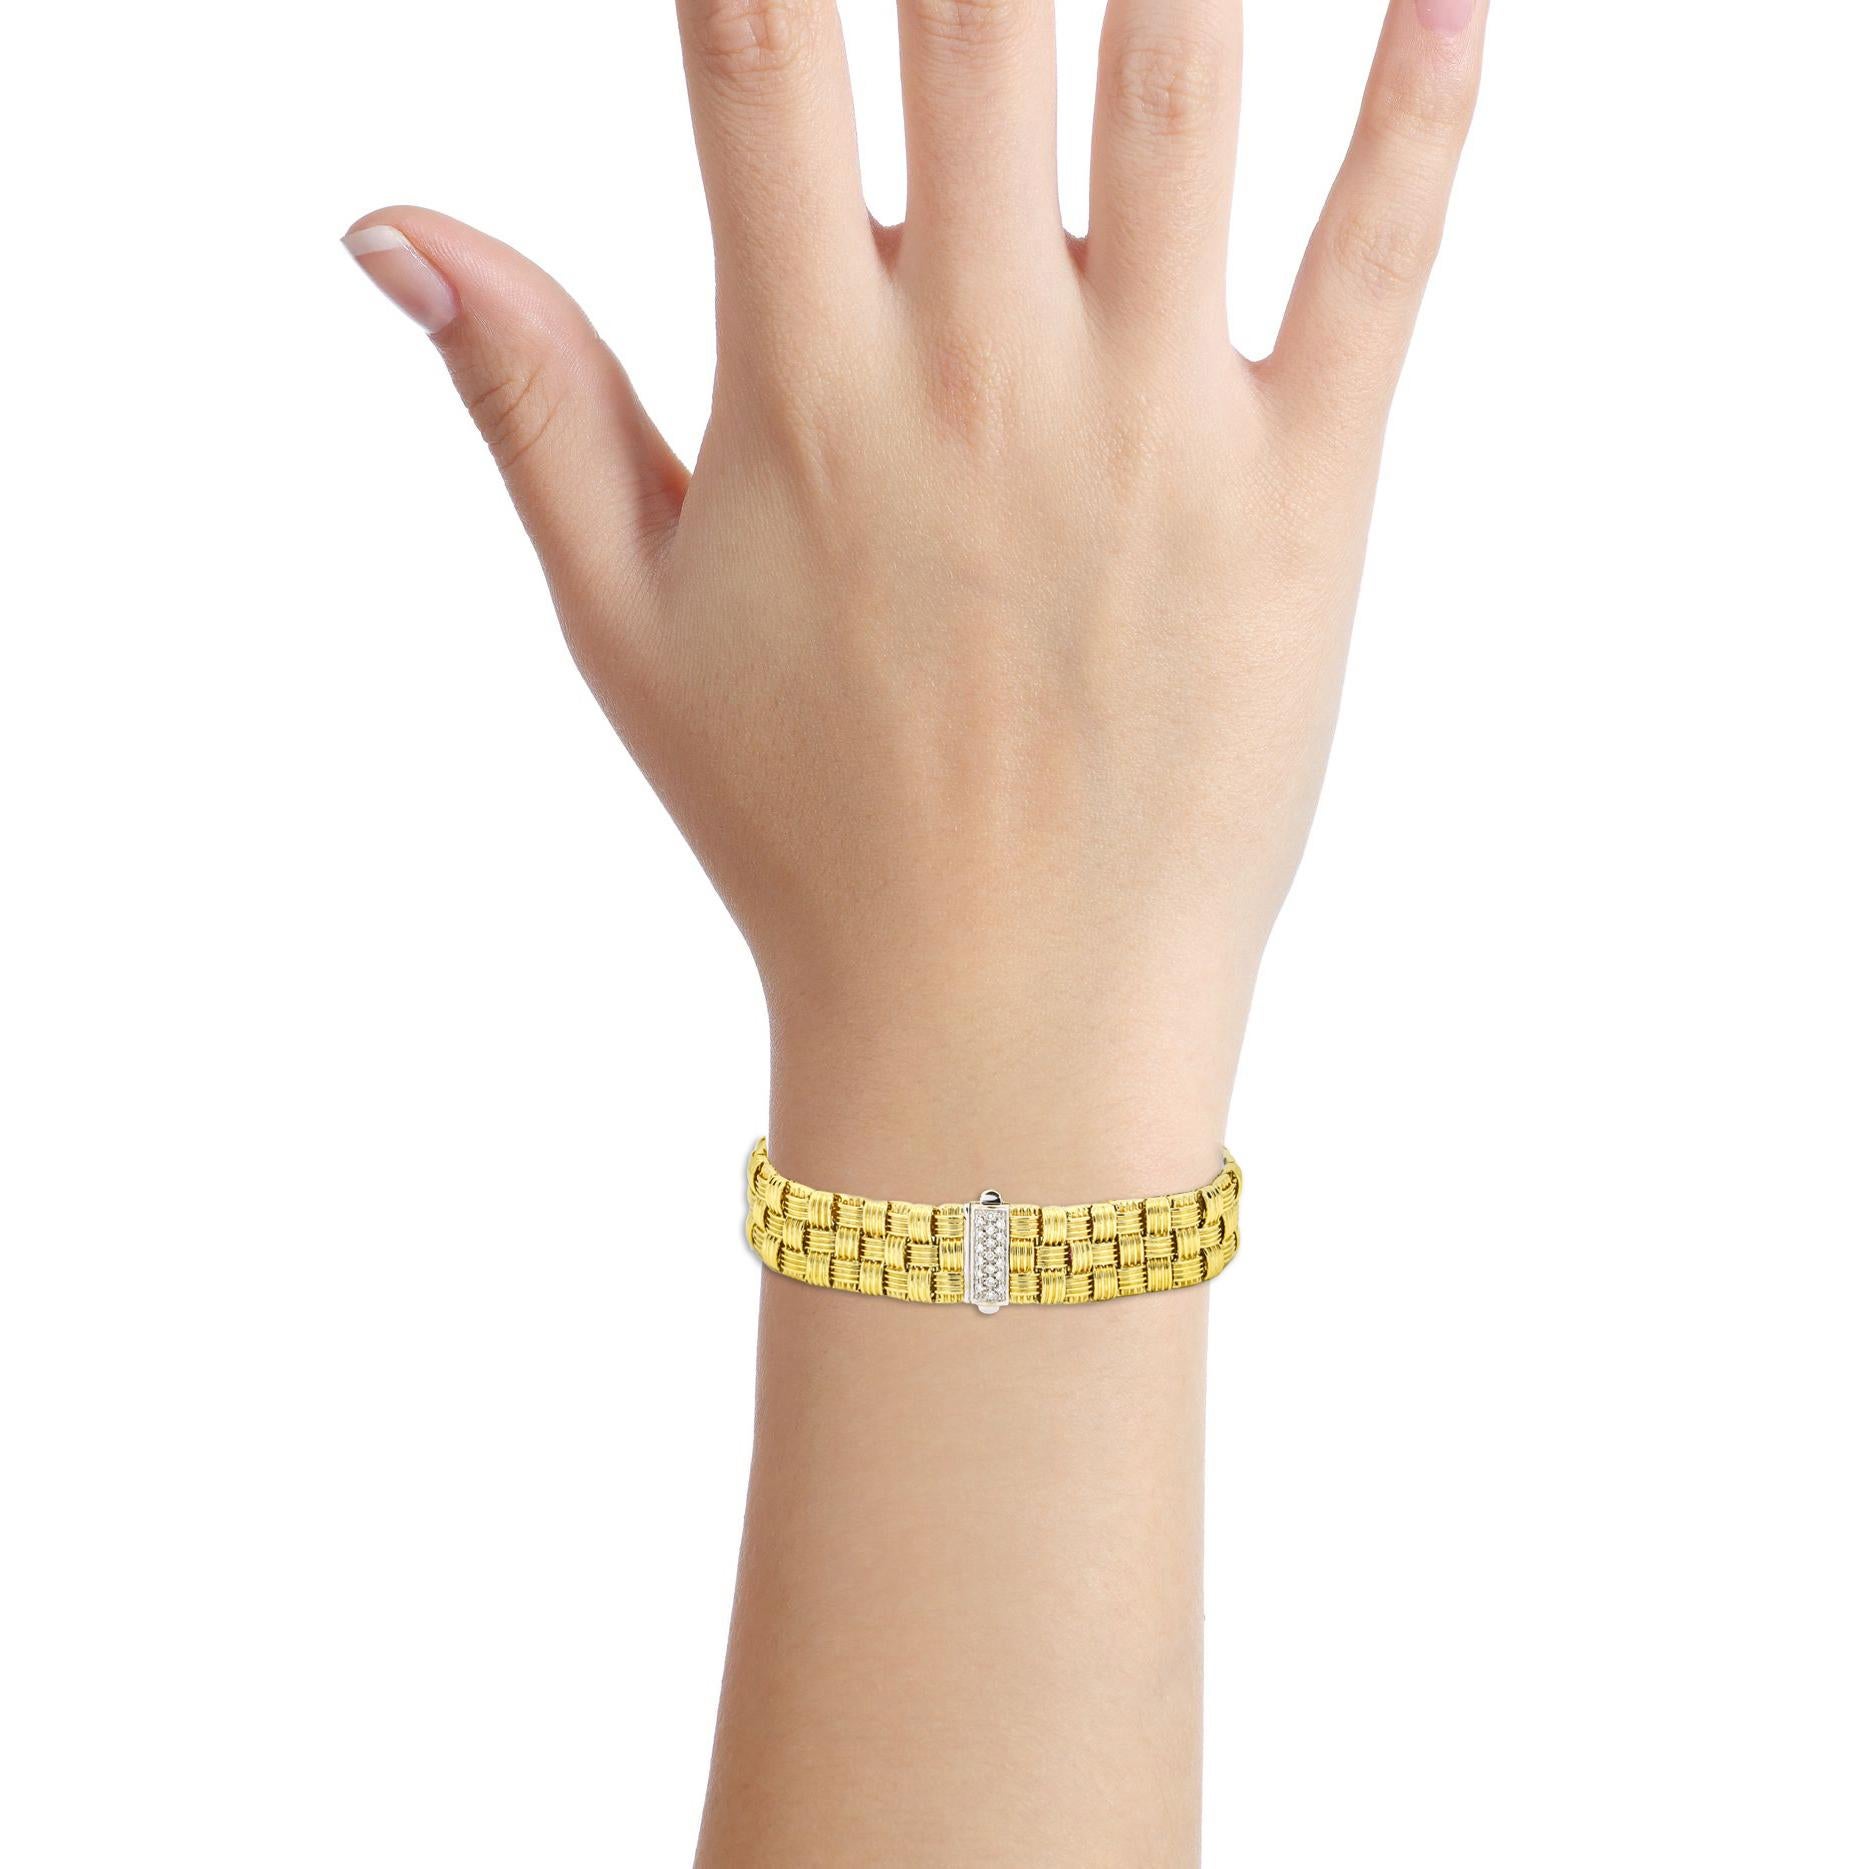 Roberto Coin classics appassionata 3-row bracelet with diamond clasp in 18-karat yellow gold. Flexible polish gold metal interlocking ribbed links in a basket wave design. Made in Italy. Designer's Catalog Number 639008AJLBD0. Retail $11,000.